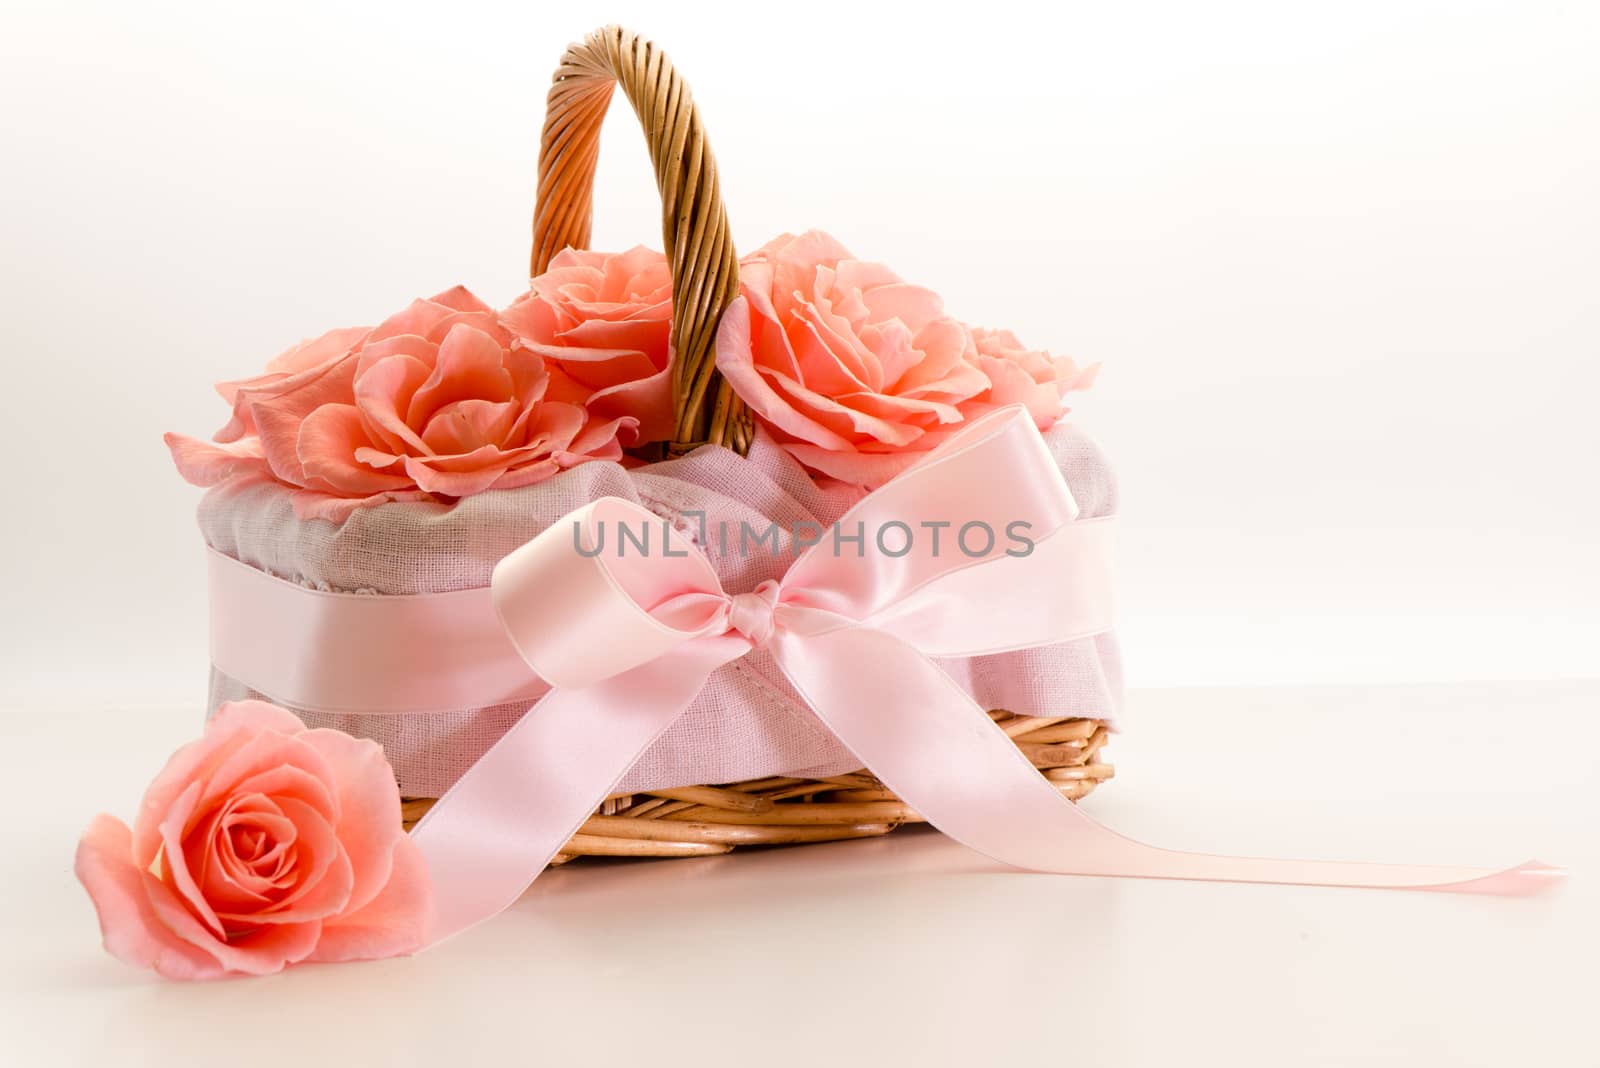 Roses in the basket with bow isolated on white background